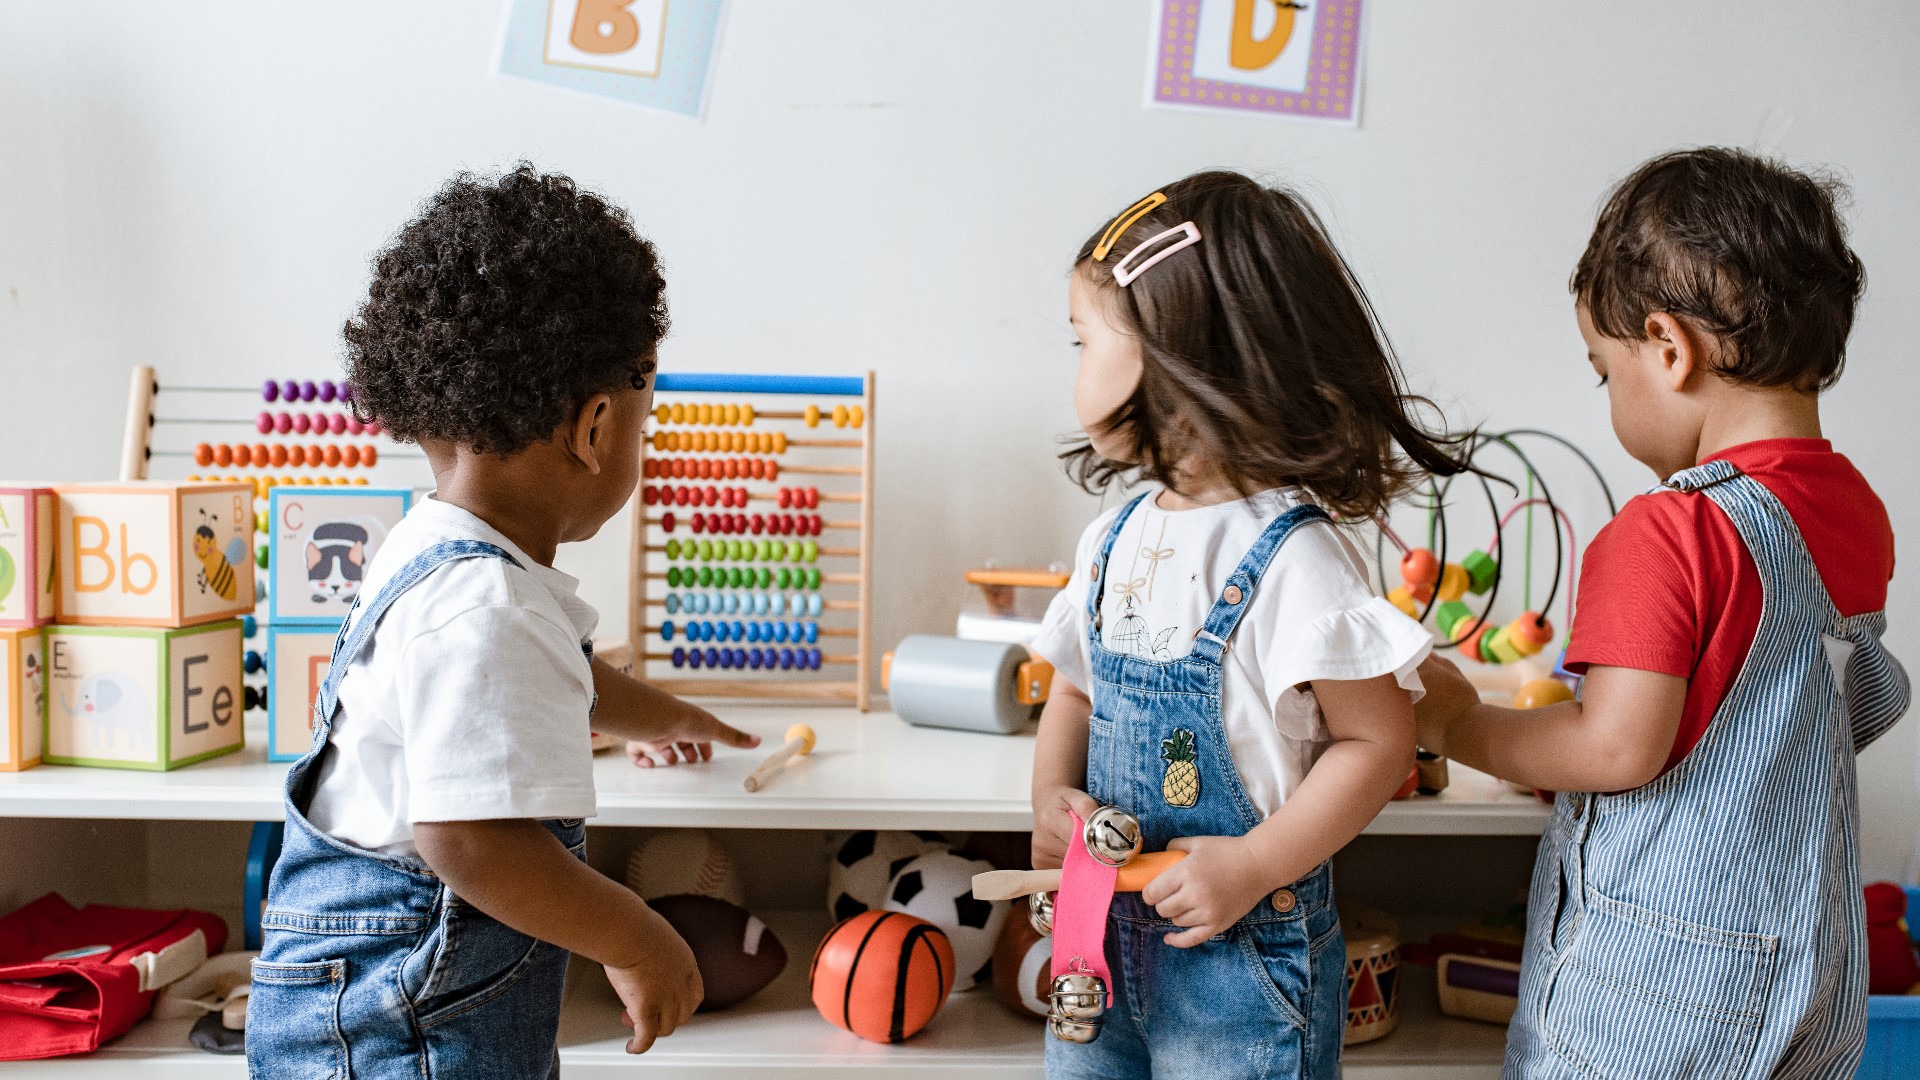 There are currently 7,000 vacancies in child care in the Commonwealth, according to the Pennsylvania Child Care Association.